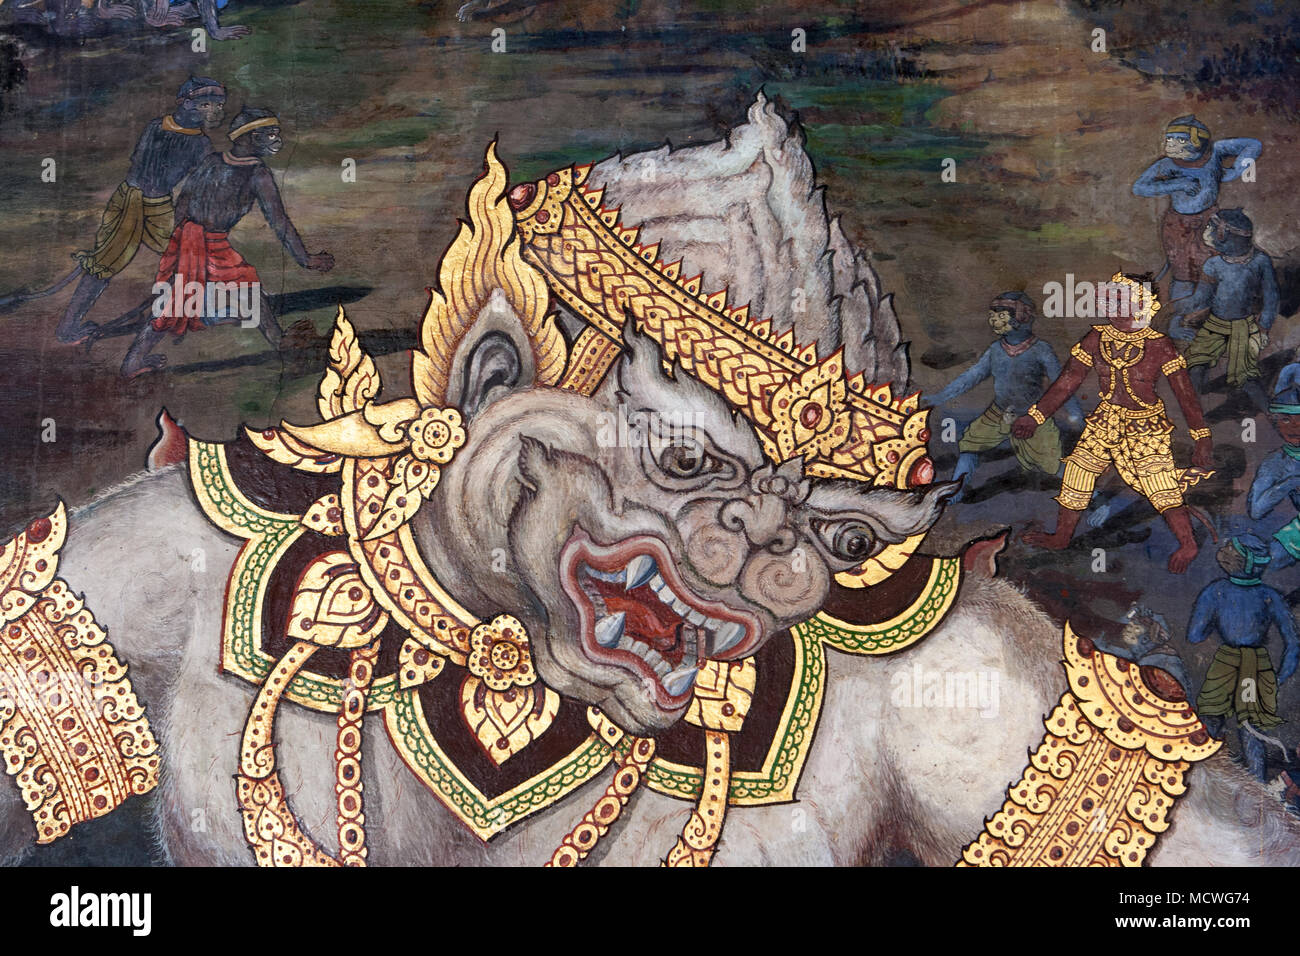 Details of the wall paintings depicting the myth of Ramakien in the Wat Phra Kaew Palace, also known as the Emerald Buddha Temple. Bangkok, Thailand. Stock Photo